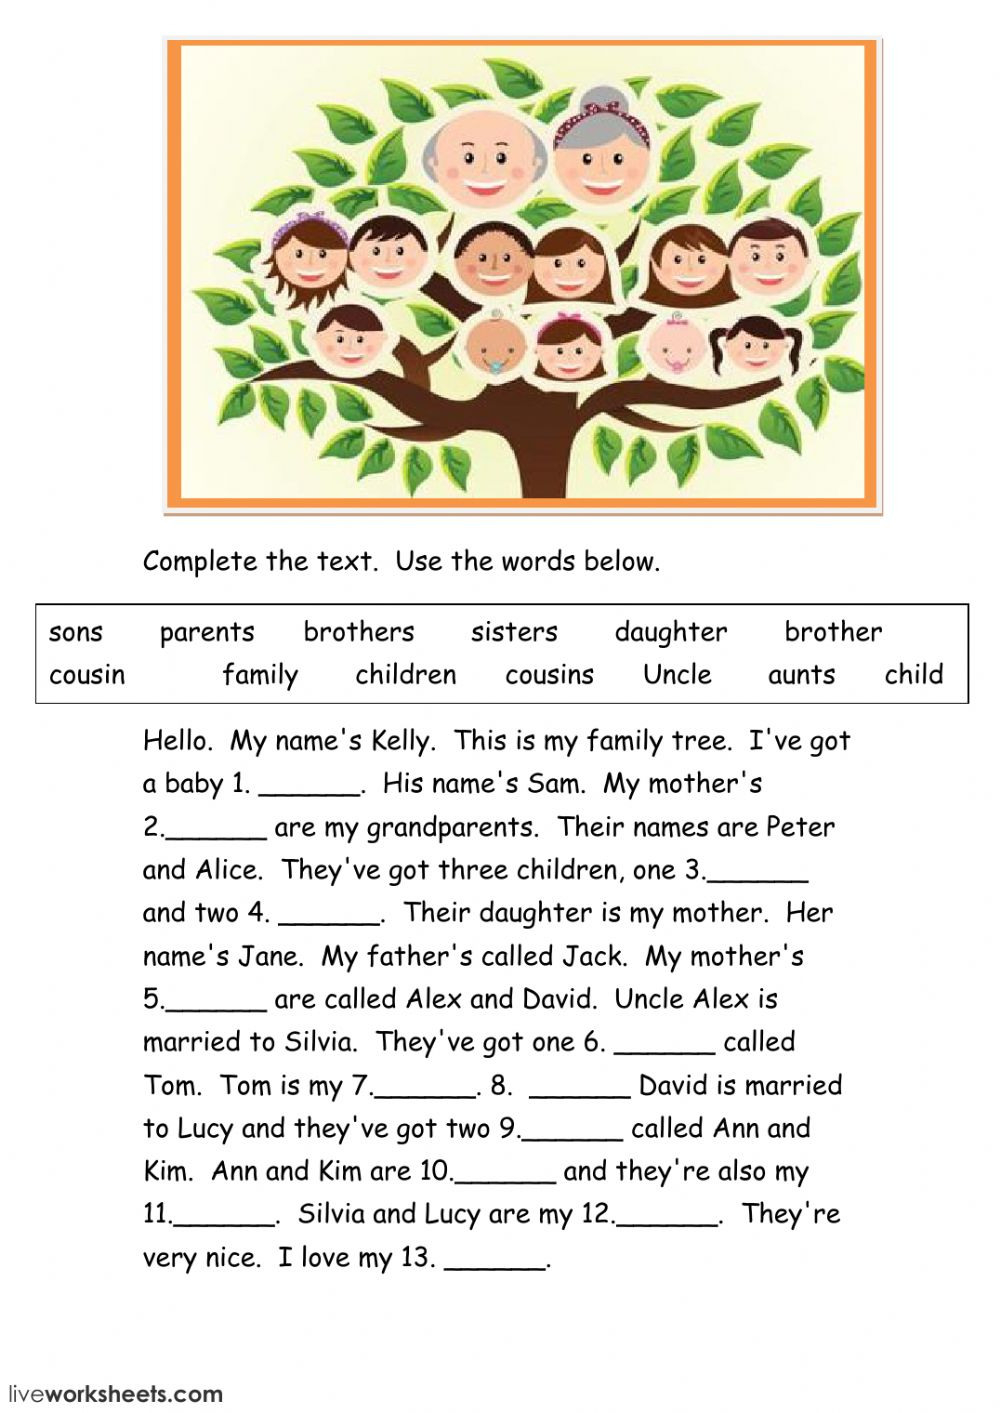 spanish-family-tree-worksheet-answers-db-excel